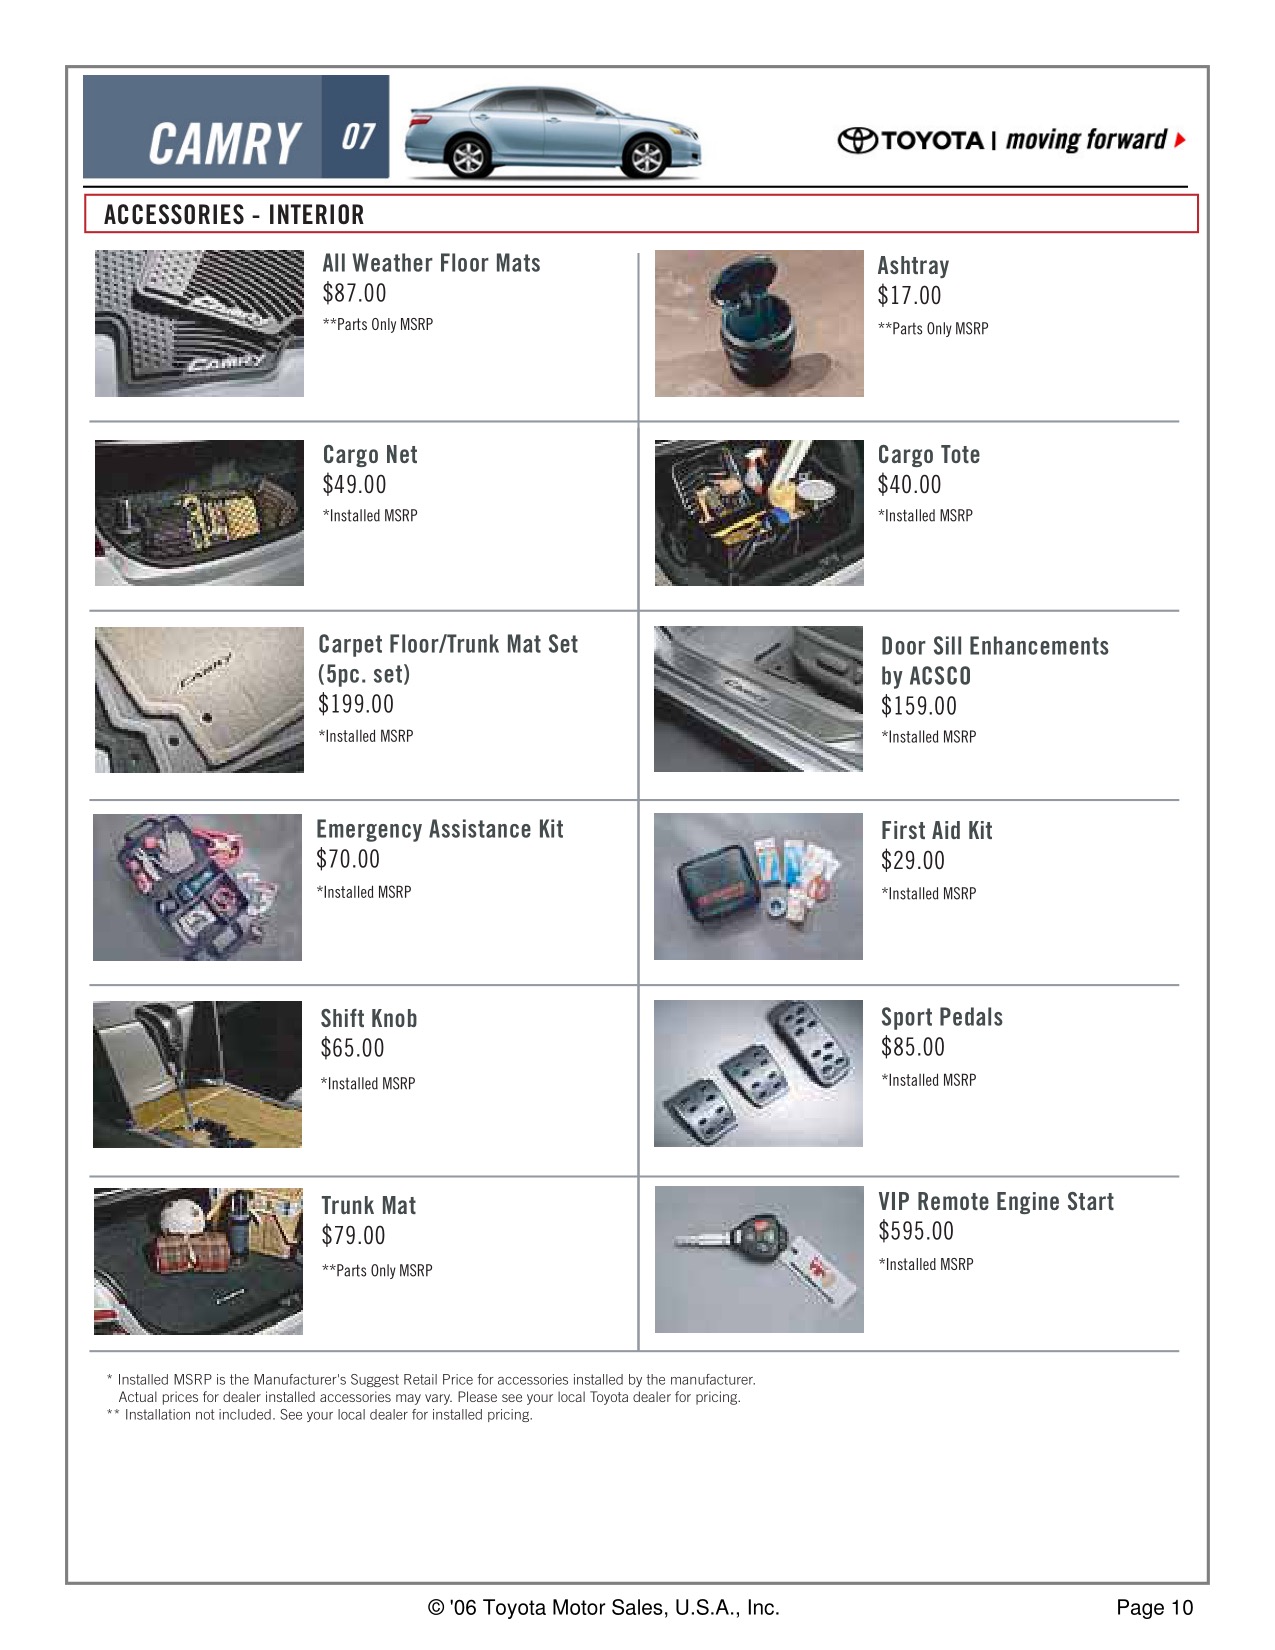 2007 Toyota Camry Brochure Page 8